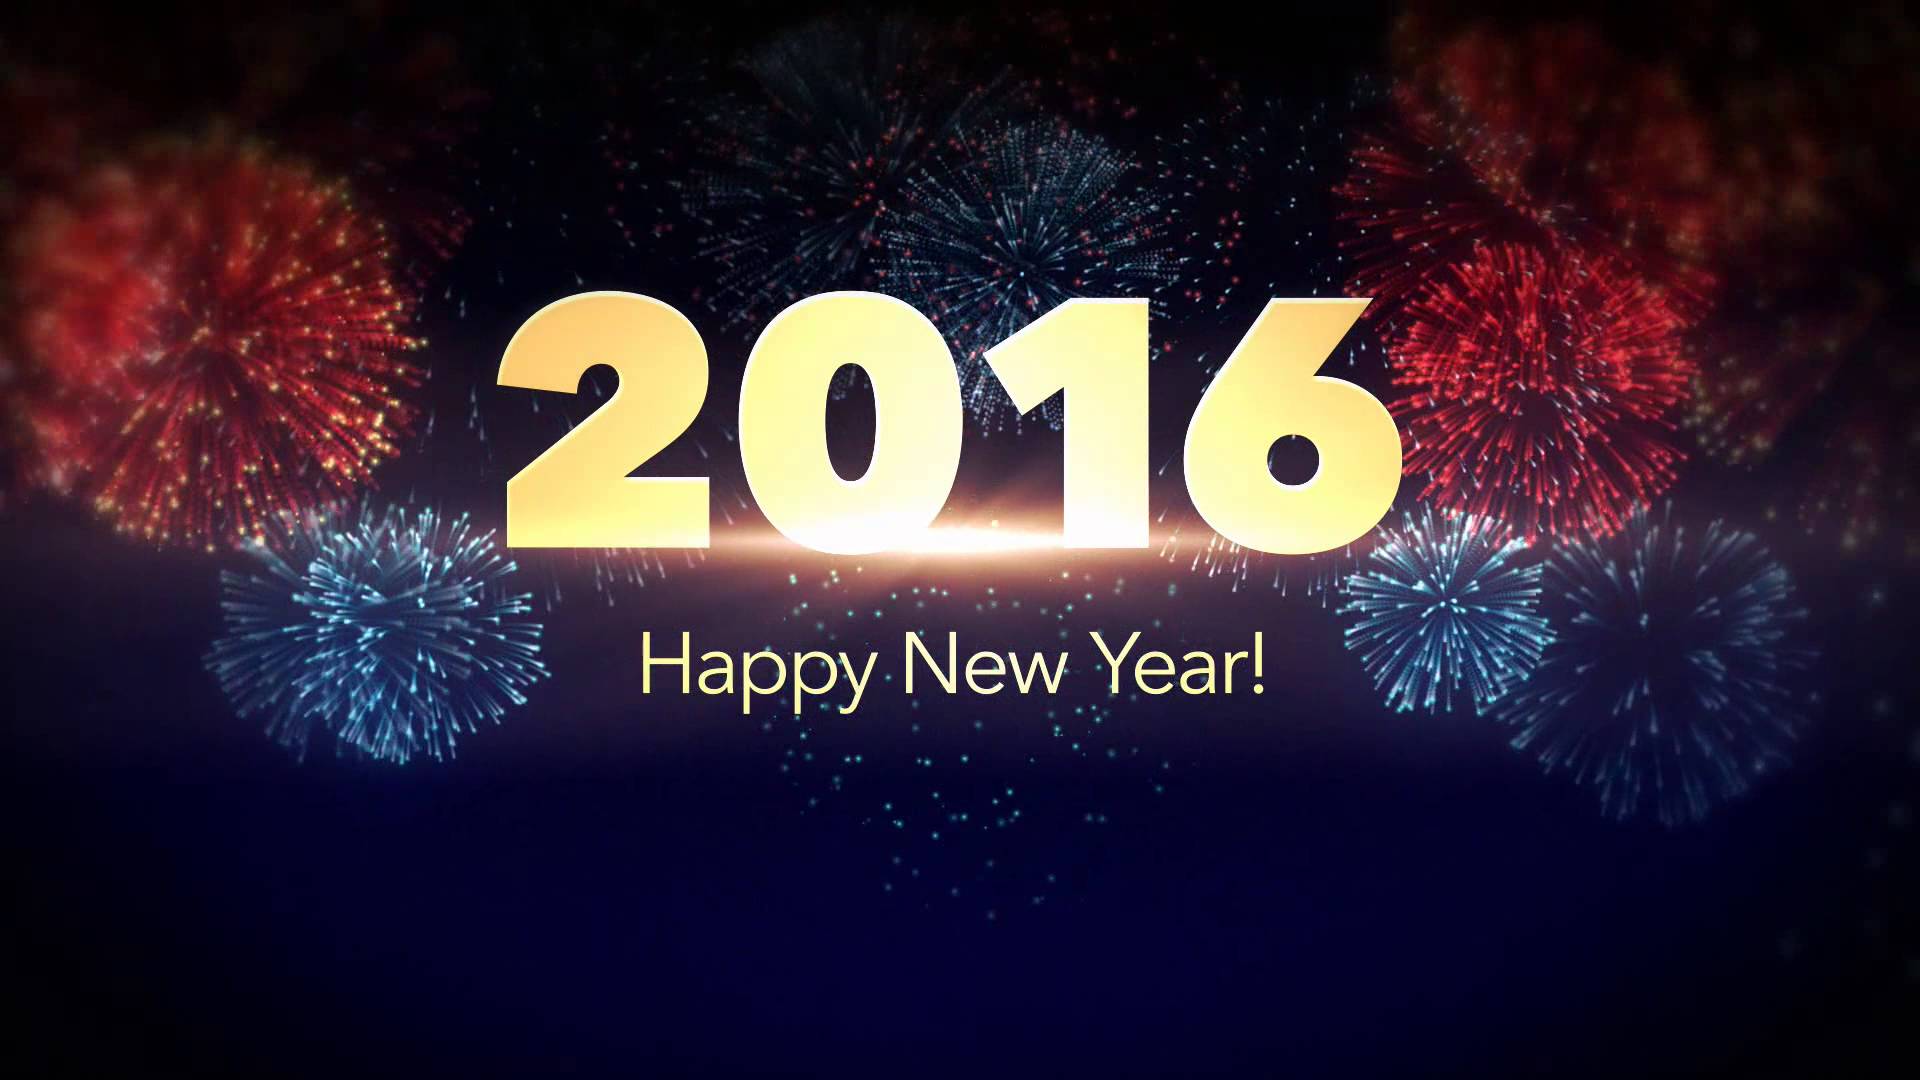 Happy New Year 2016 Wallpaper Image Download {HD 50+}. Happy